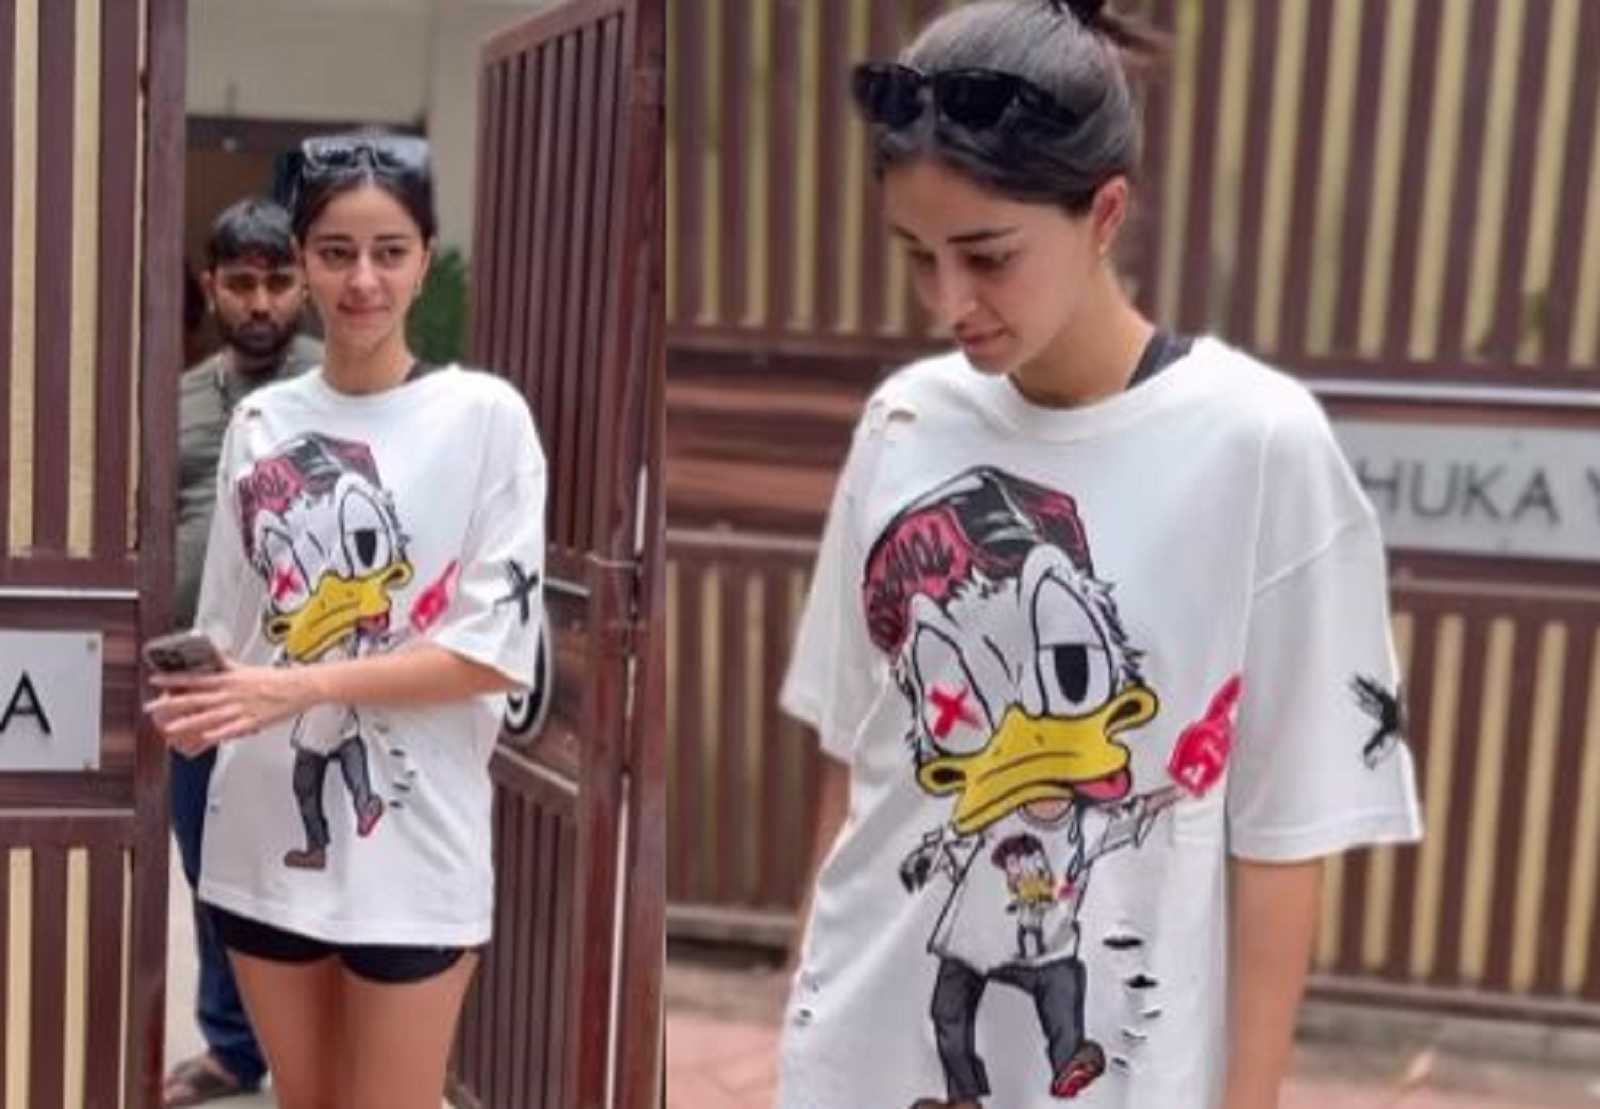 Is Ananya Panday's white printed T-shirt from Aryan Khan's streetwear brand? fans think so